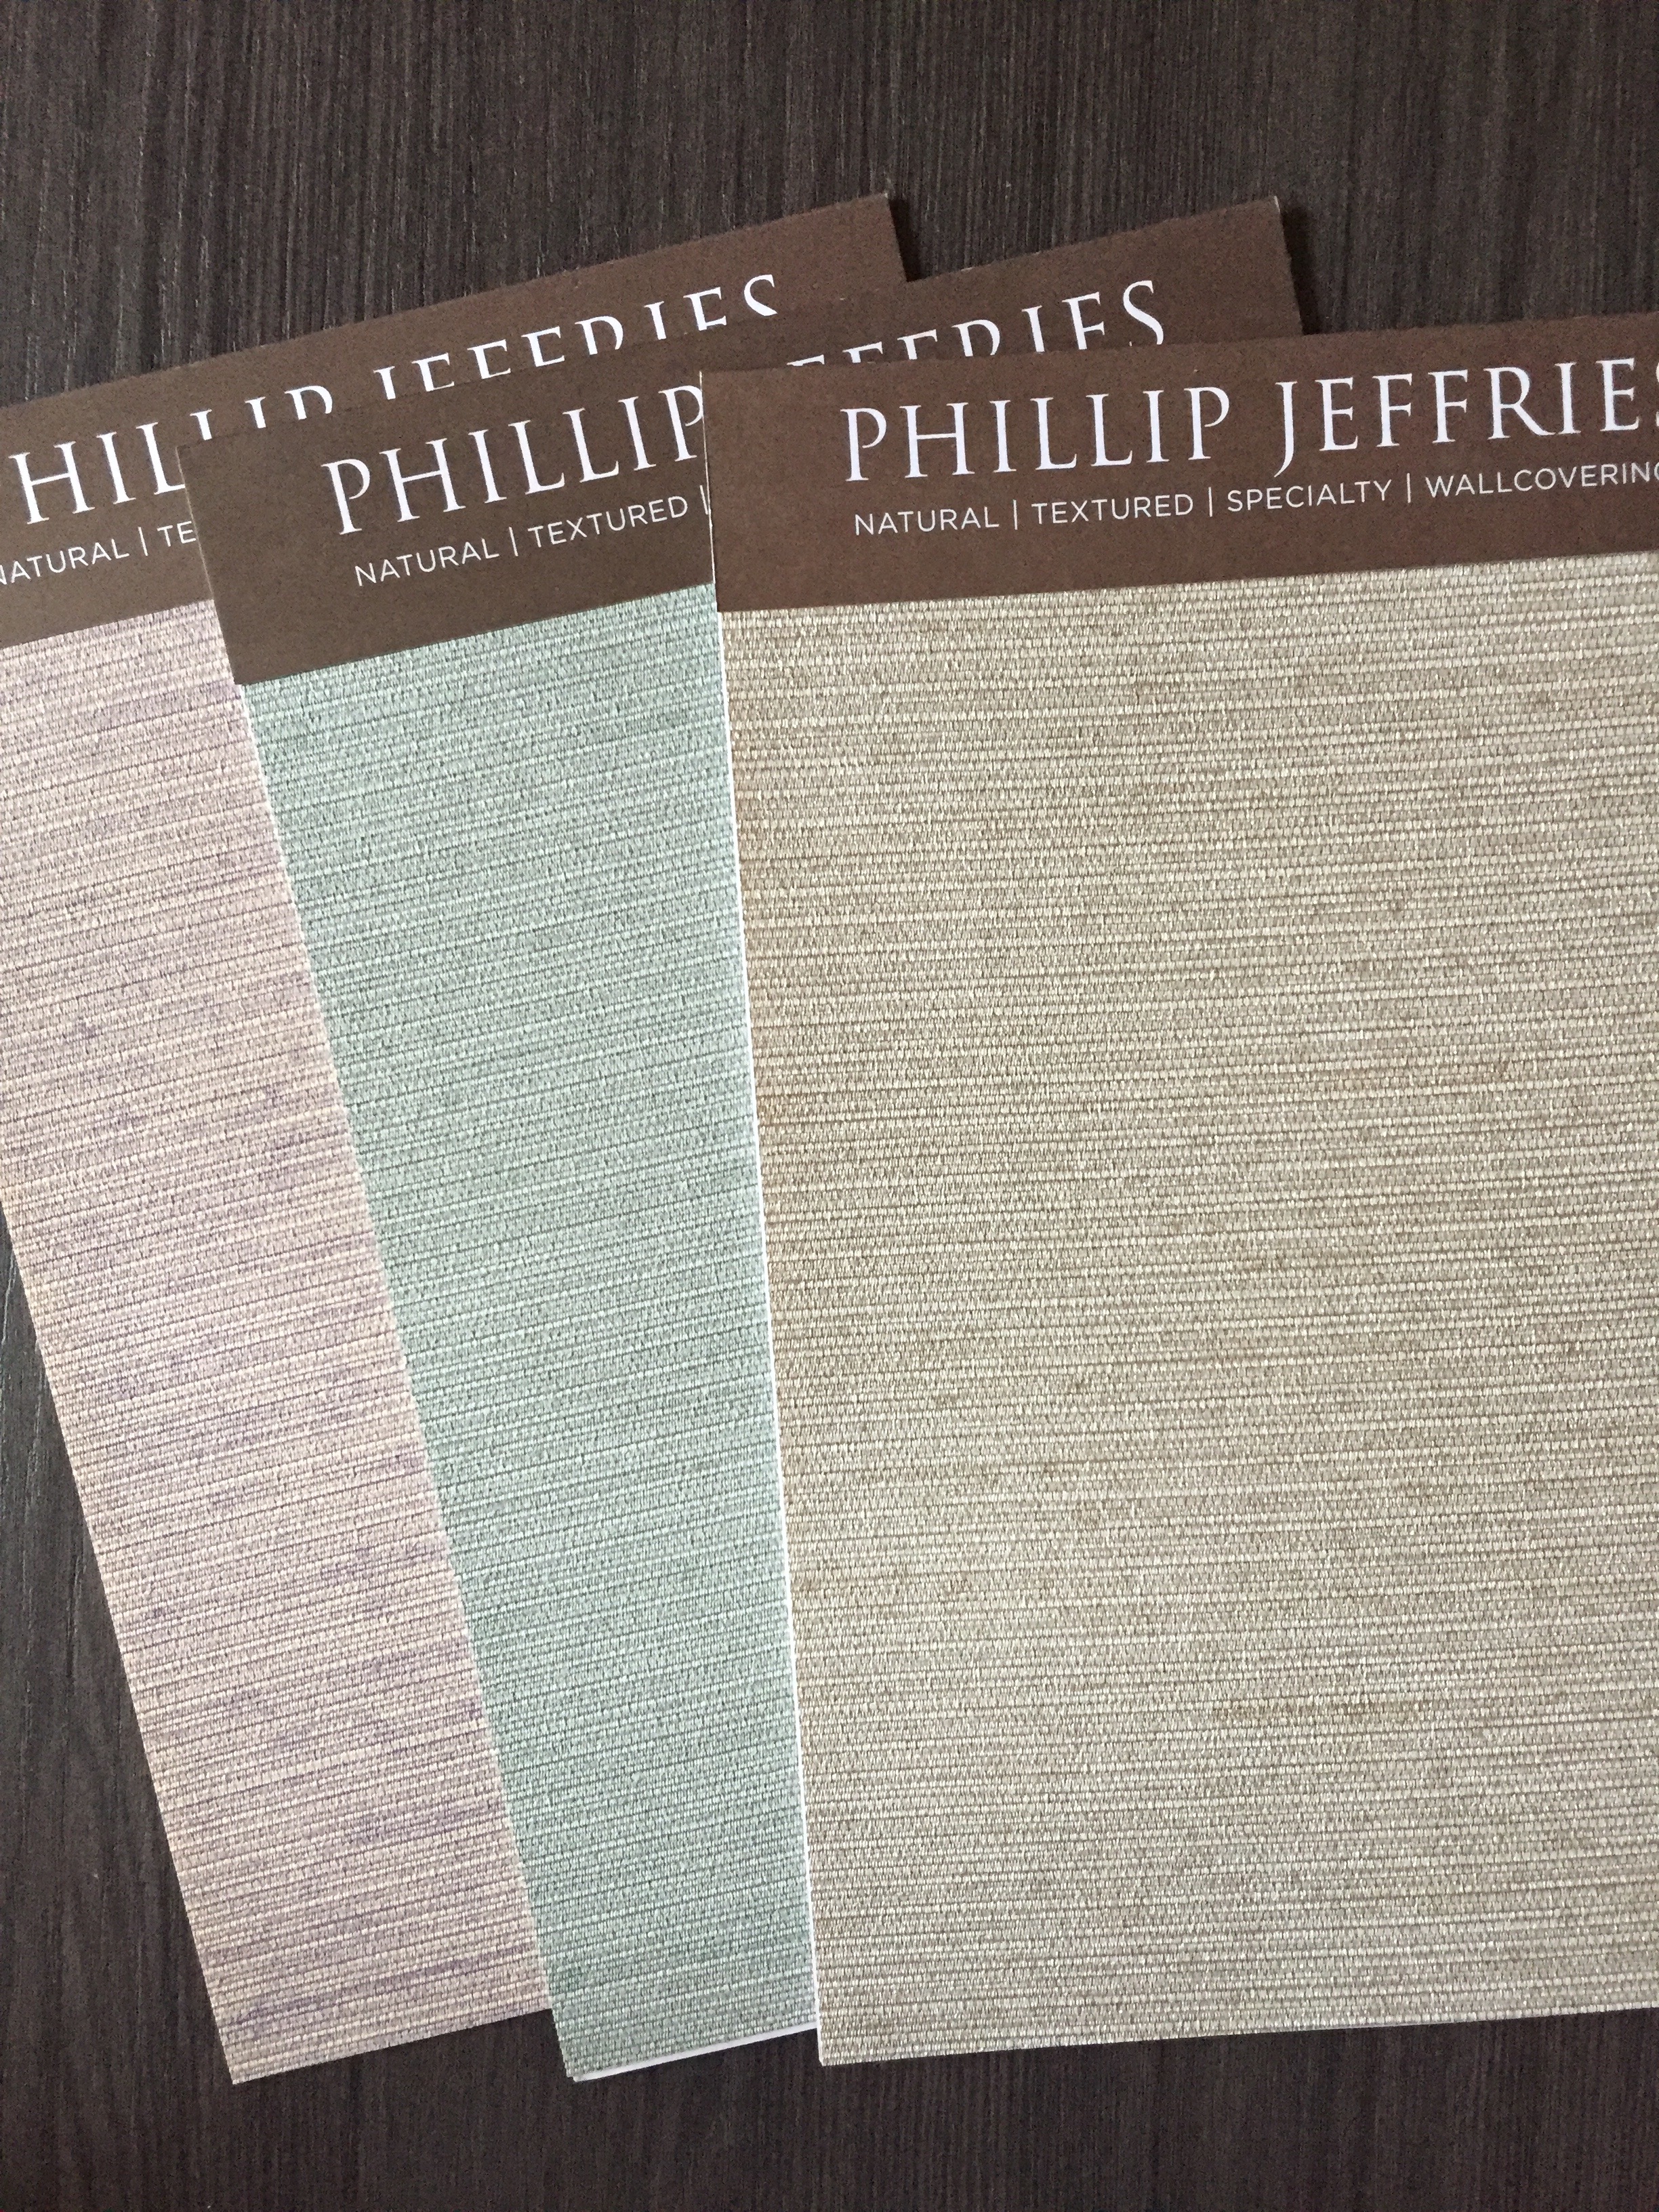 Friday Family-Friendly Find: Phillip Jeffries Vinyl Tailored Linens | Interiors for Families